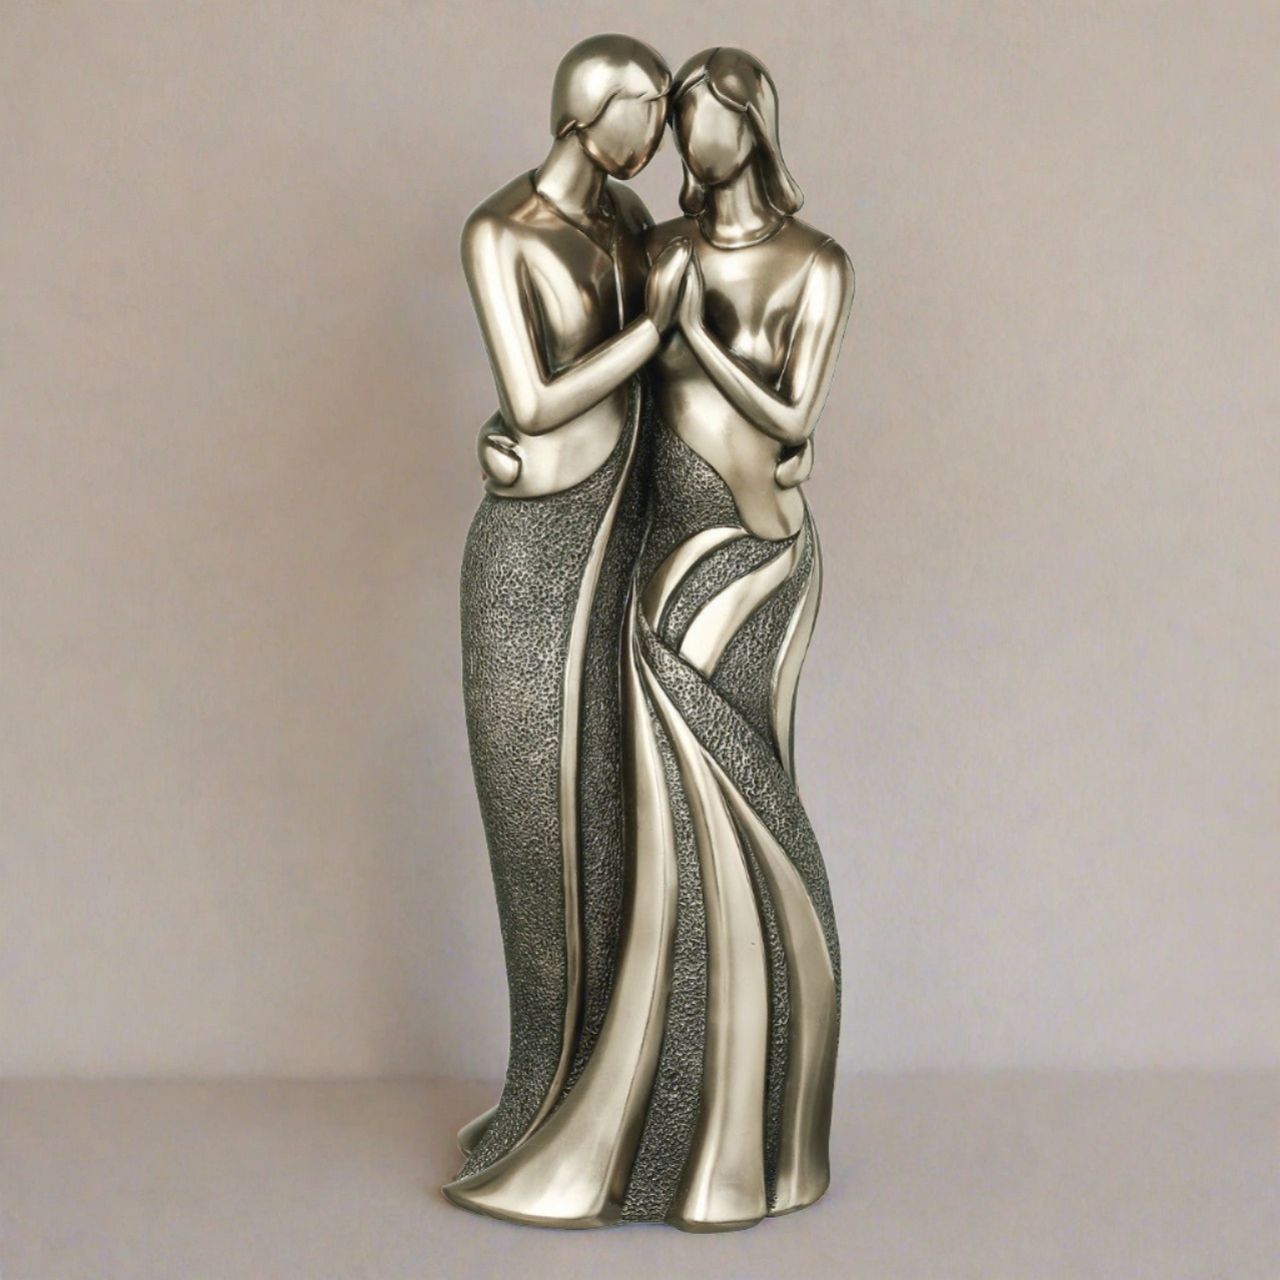 Perfect for art lovers or for an occasional gift such as a wedding gift, or an engagement gift.